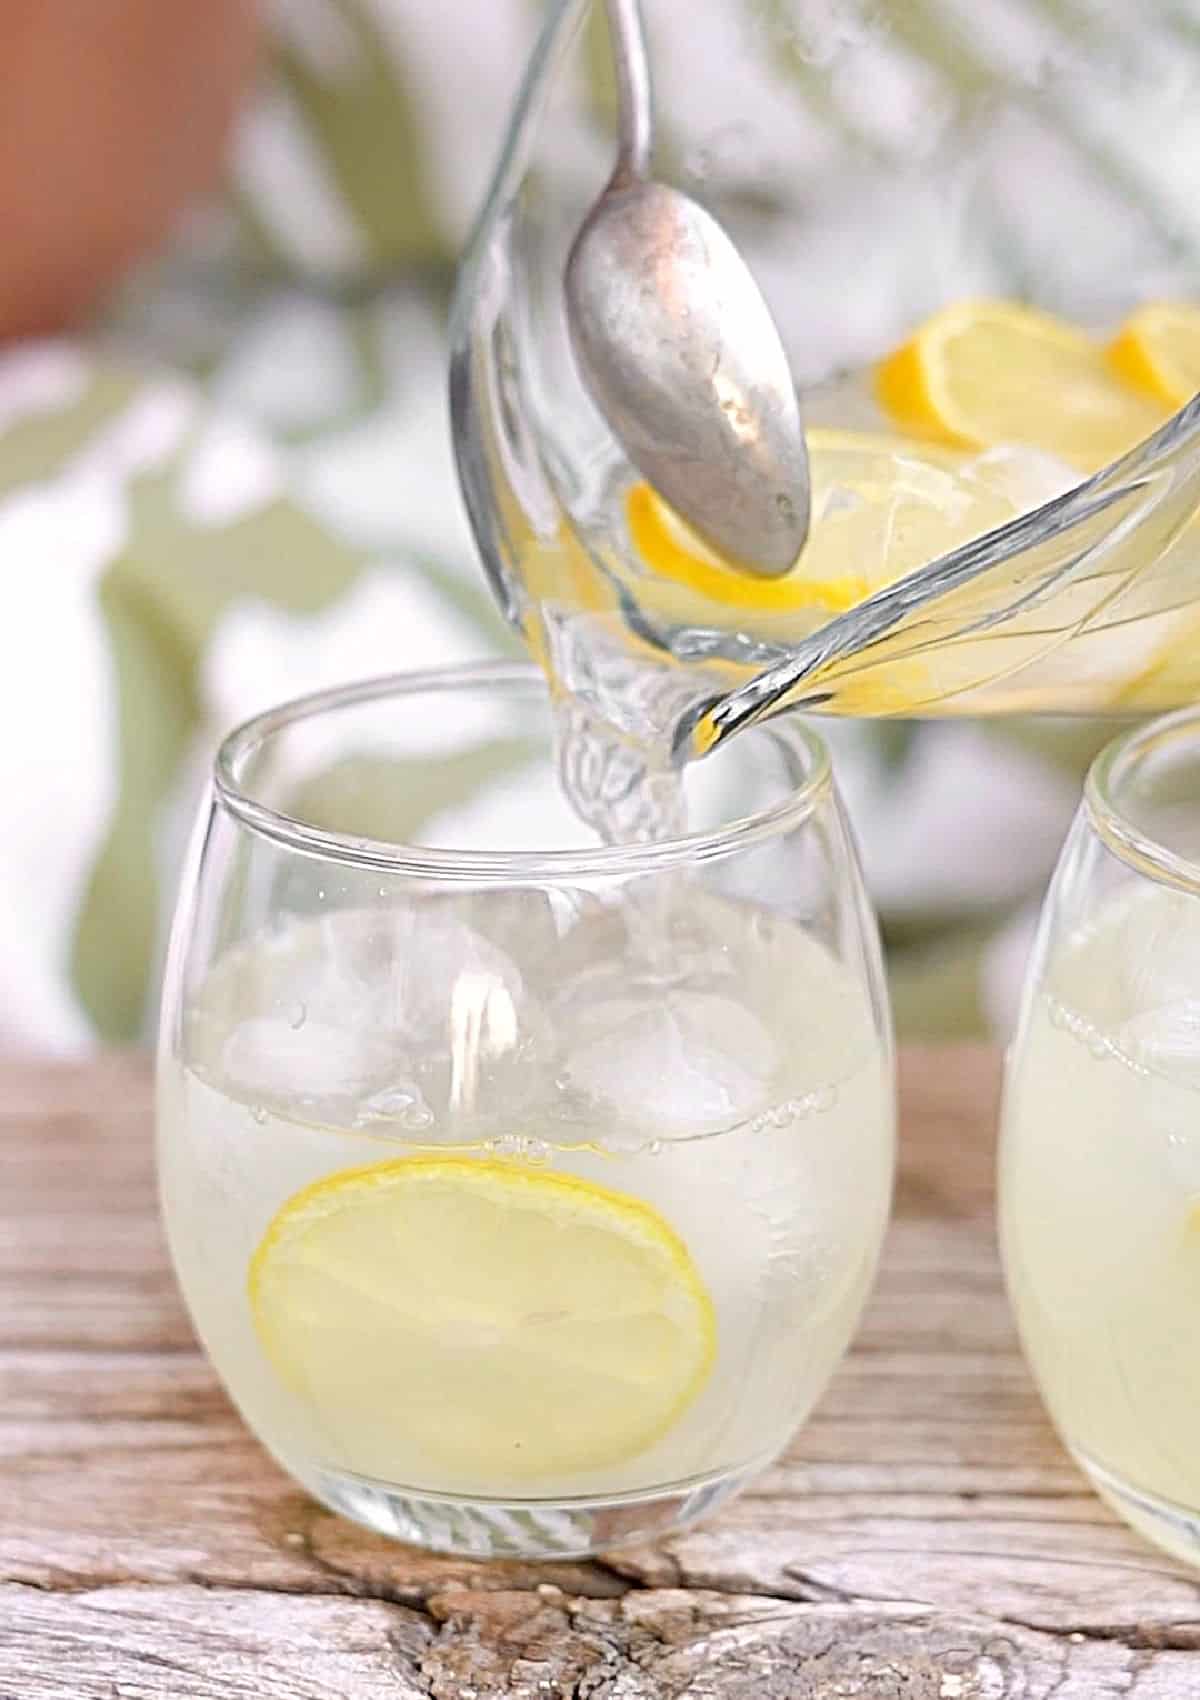 Homemade lemonade being served from a jar into a glass with lemon slice on a wooden surface. Green and white background.